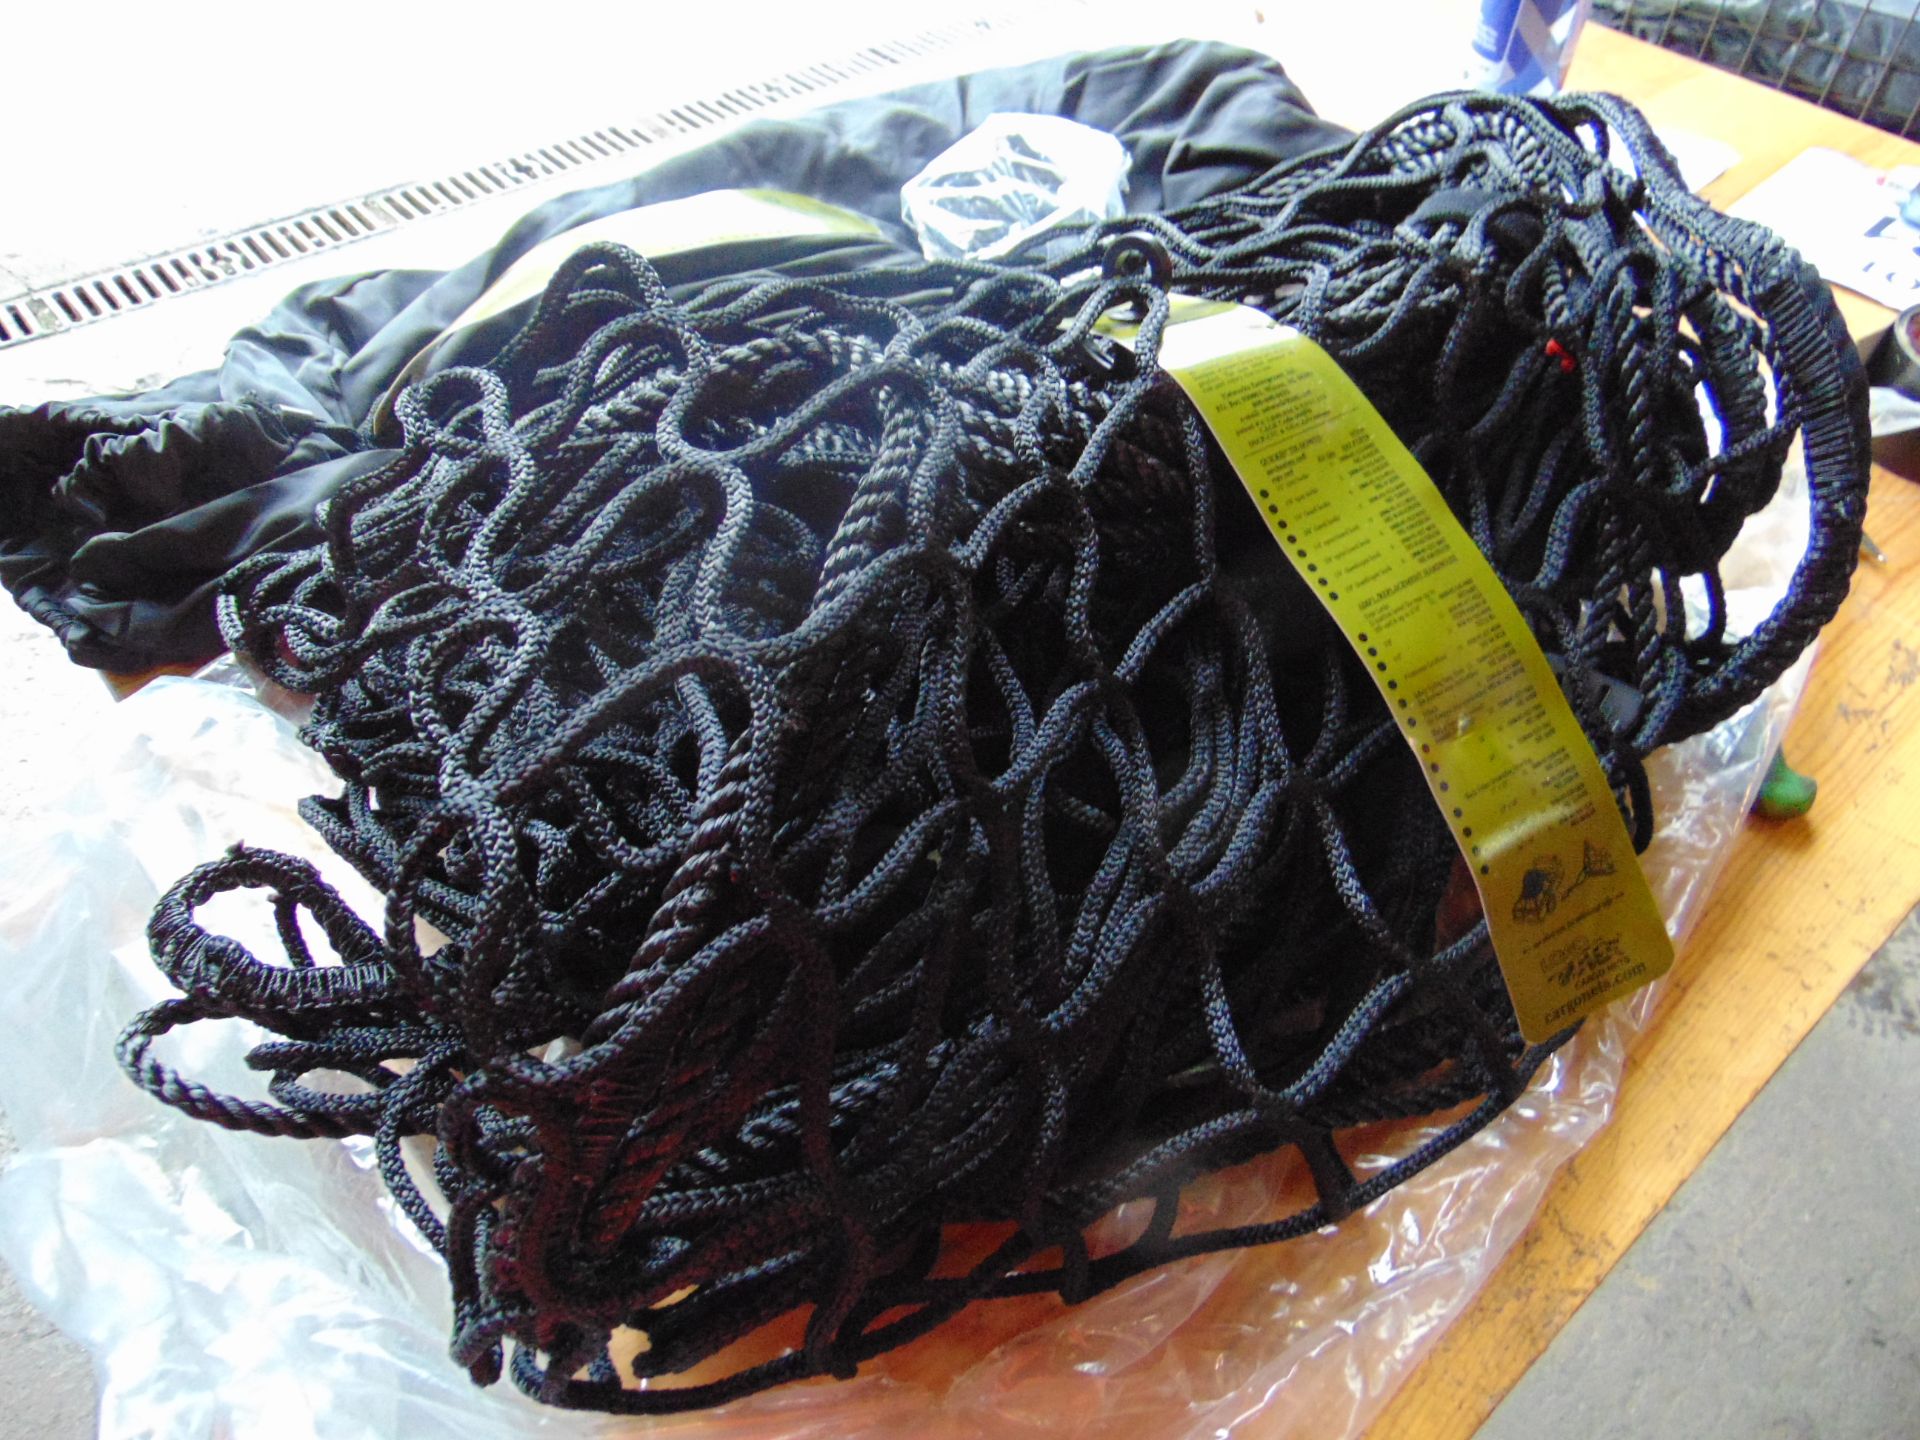 1x New Unissued Load Tamer Cargo Net in Bag and Original Packing, Clips etc, Size 80"X84" - Image 7 of 7